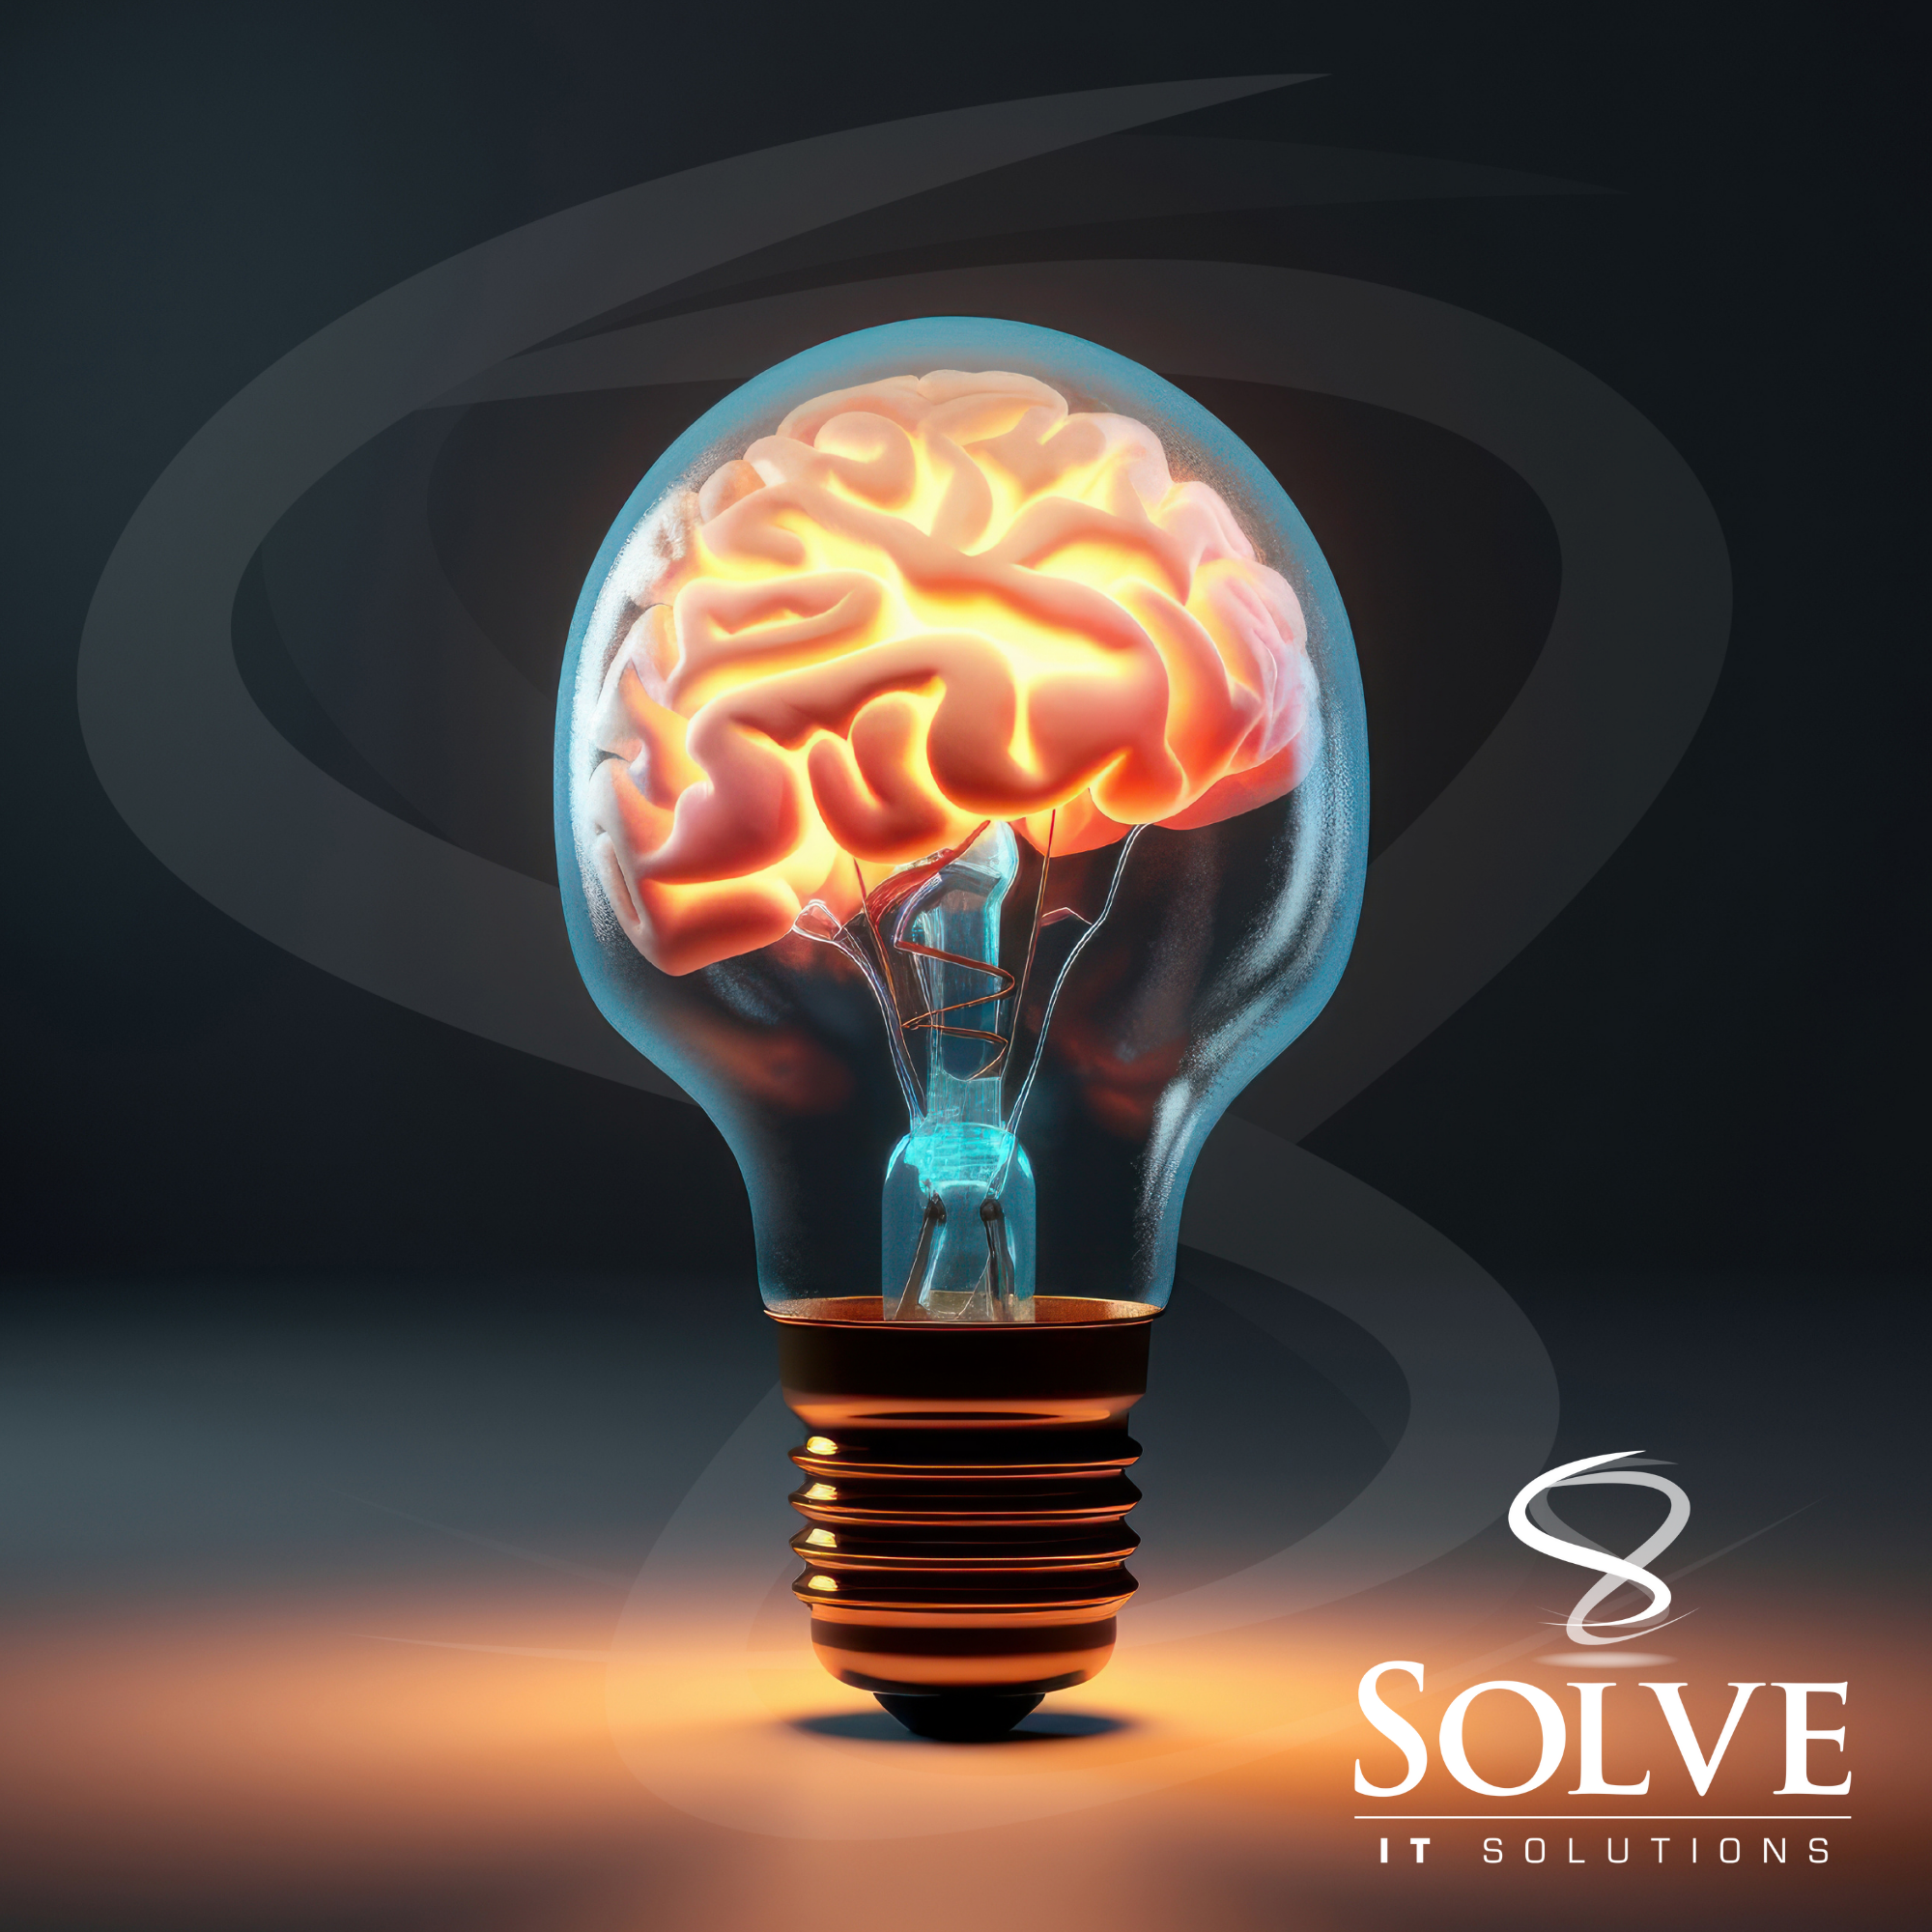 blue lit lightbulb with a brain inside. Solve IT Branding in the background and the lower right corner.